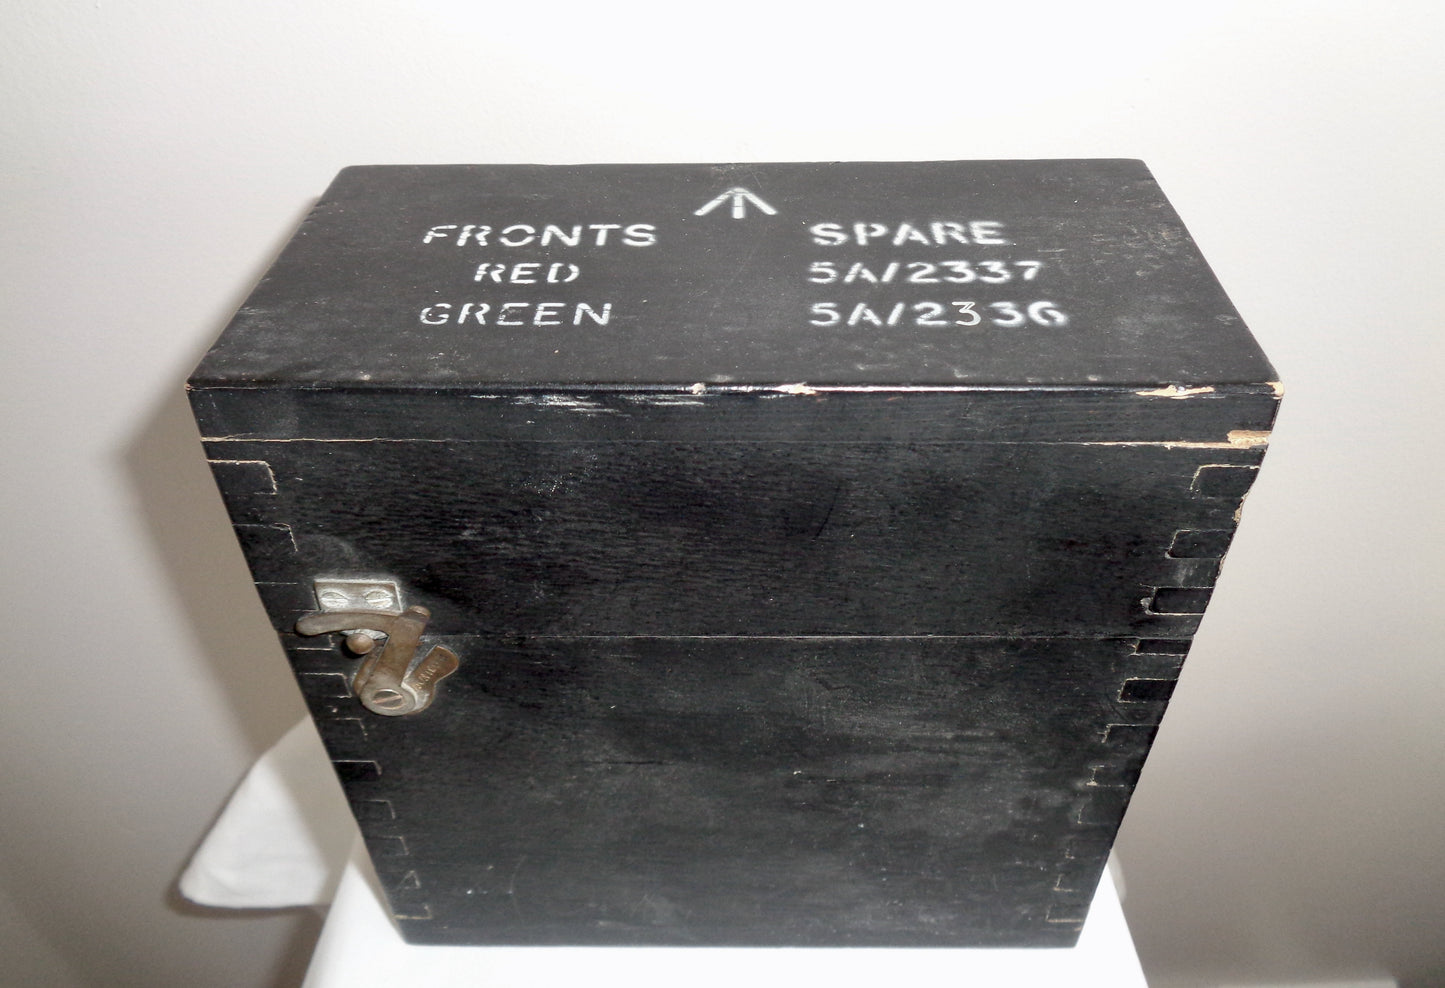 WW2 RAF Red 5A/2337 And Green 5A/2336 Signalling Lamp B Fronts Filters In A 5A/4819 Spares Box